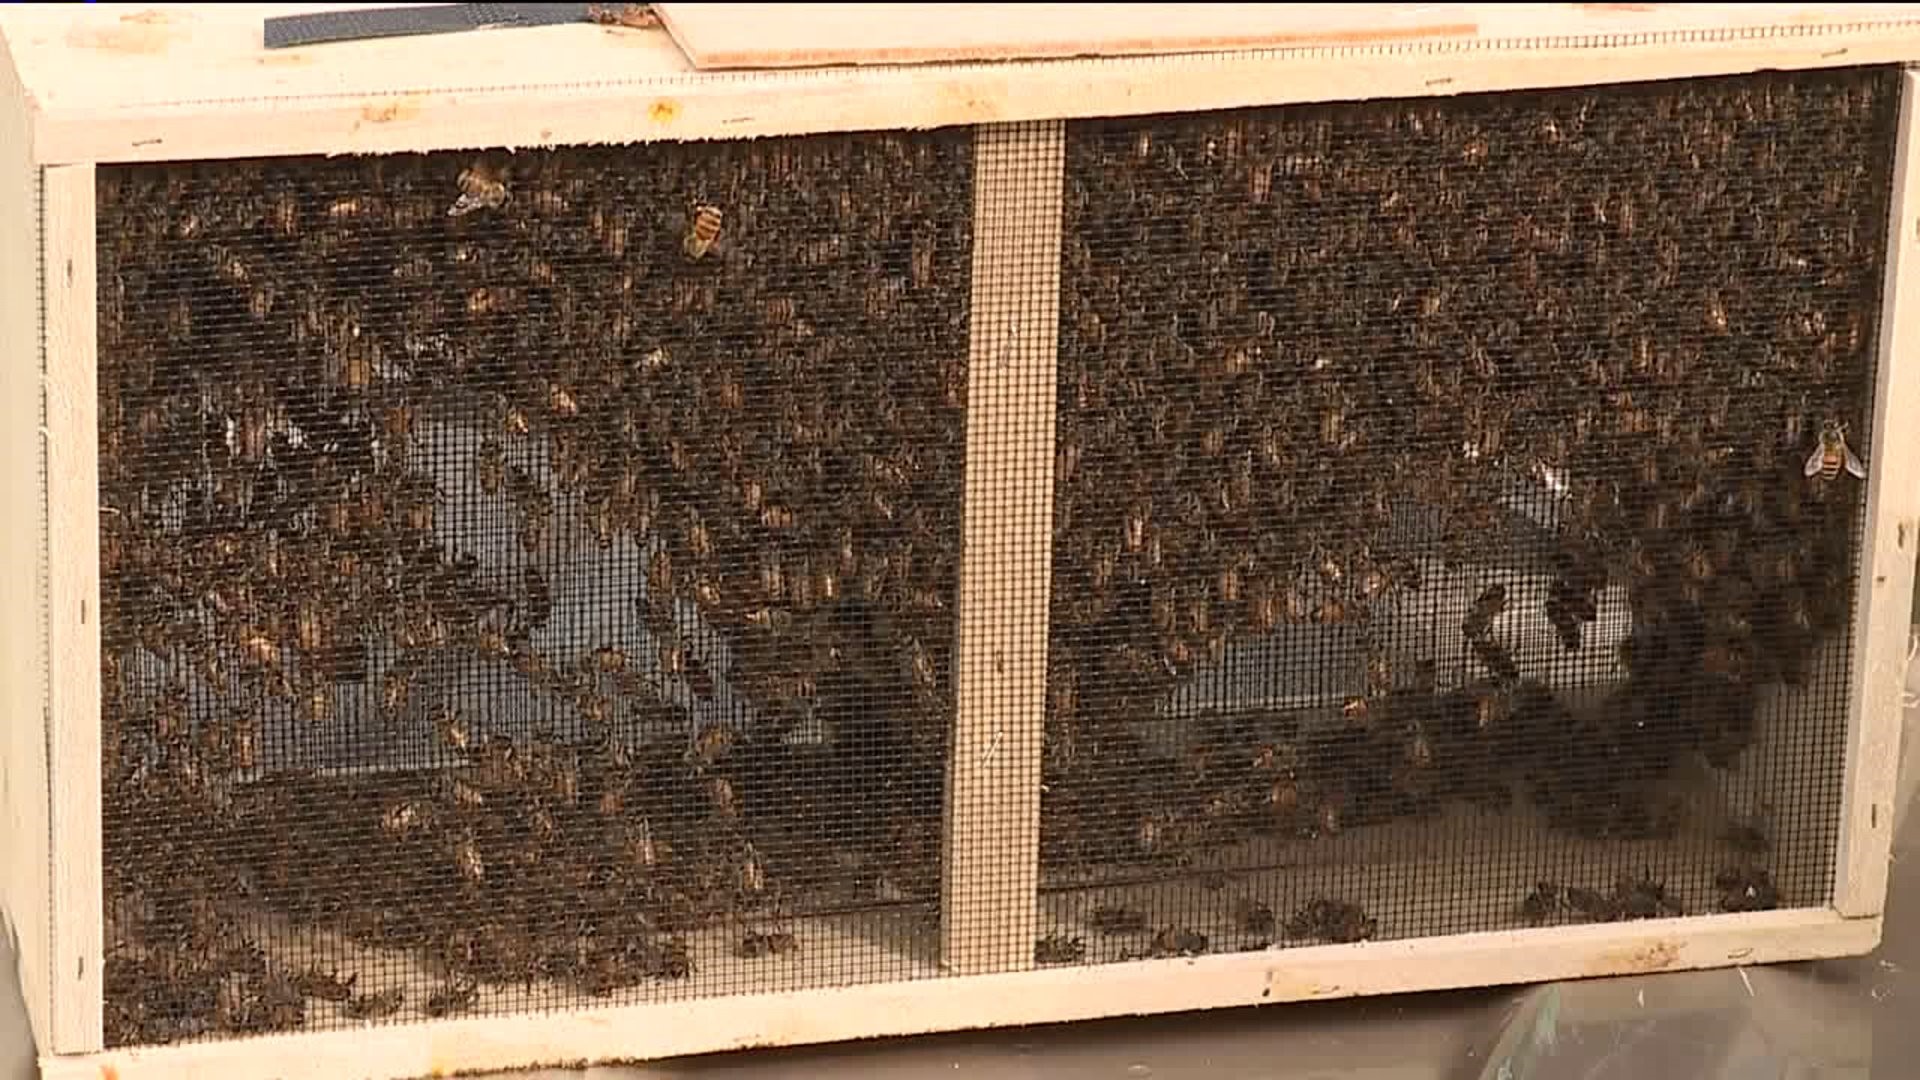 Bee Day in Union County